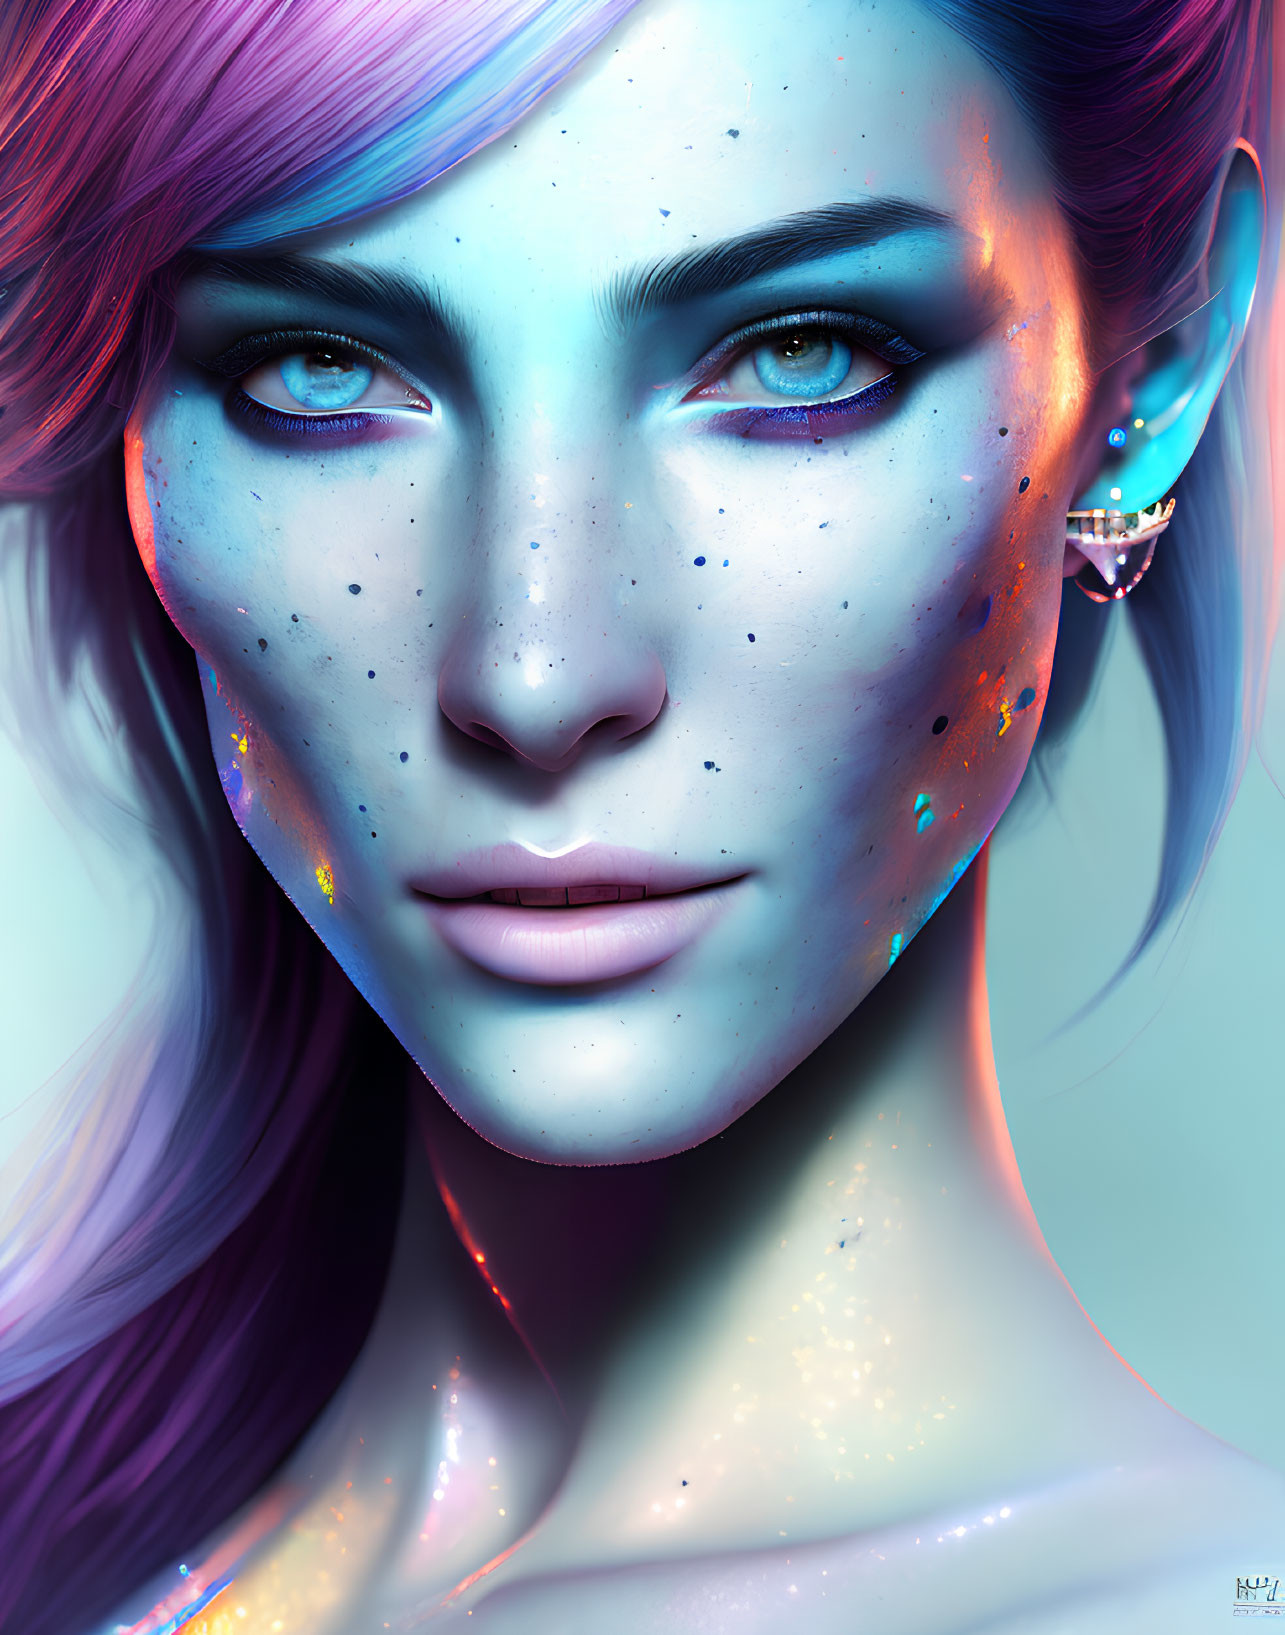 Colorful digital portrait featuring blue and pink tones, freckles, and blue eyes.